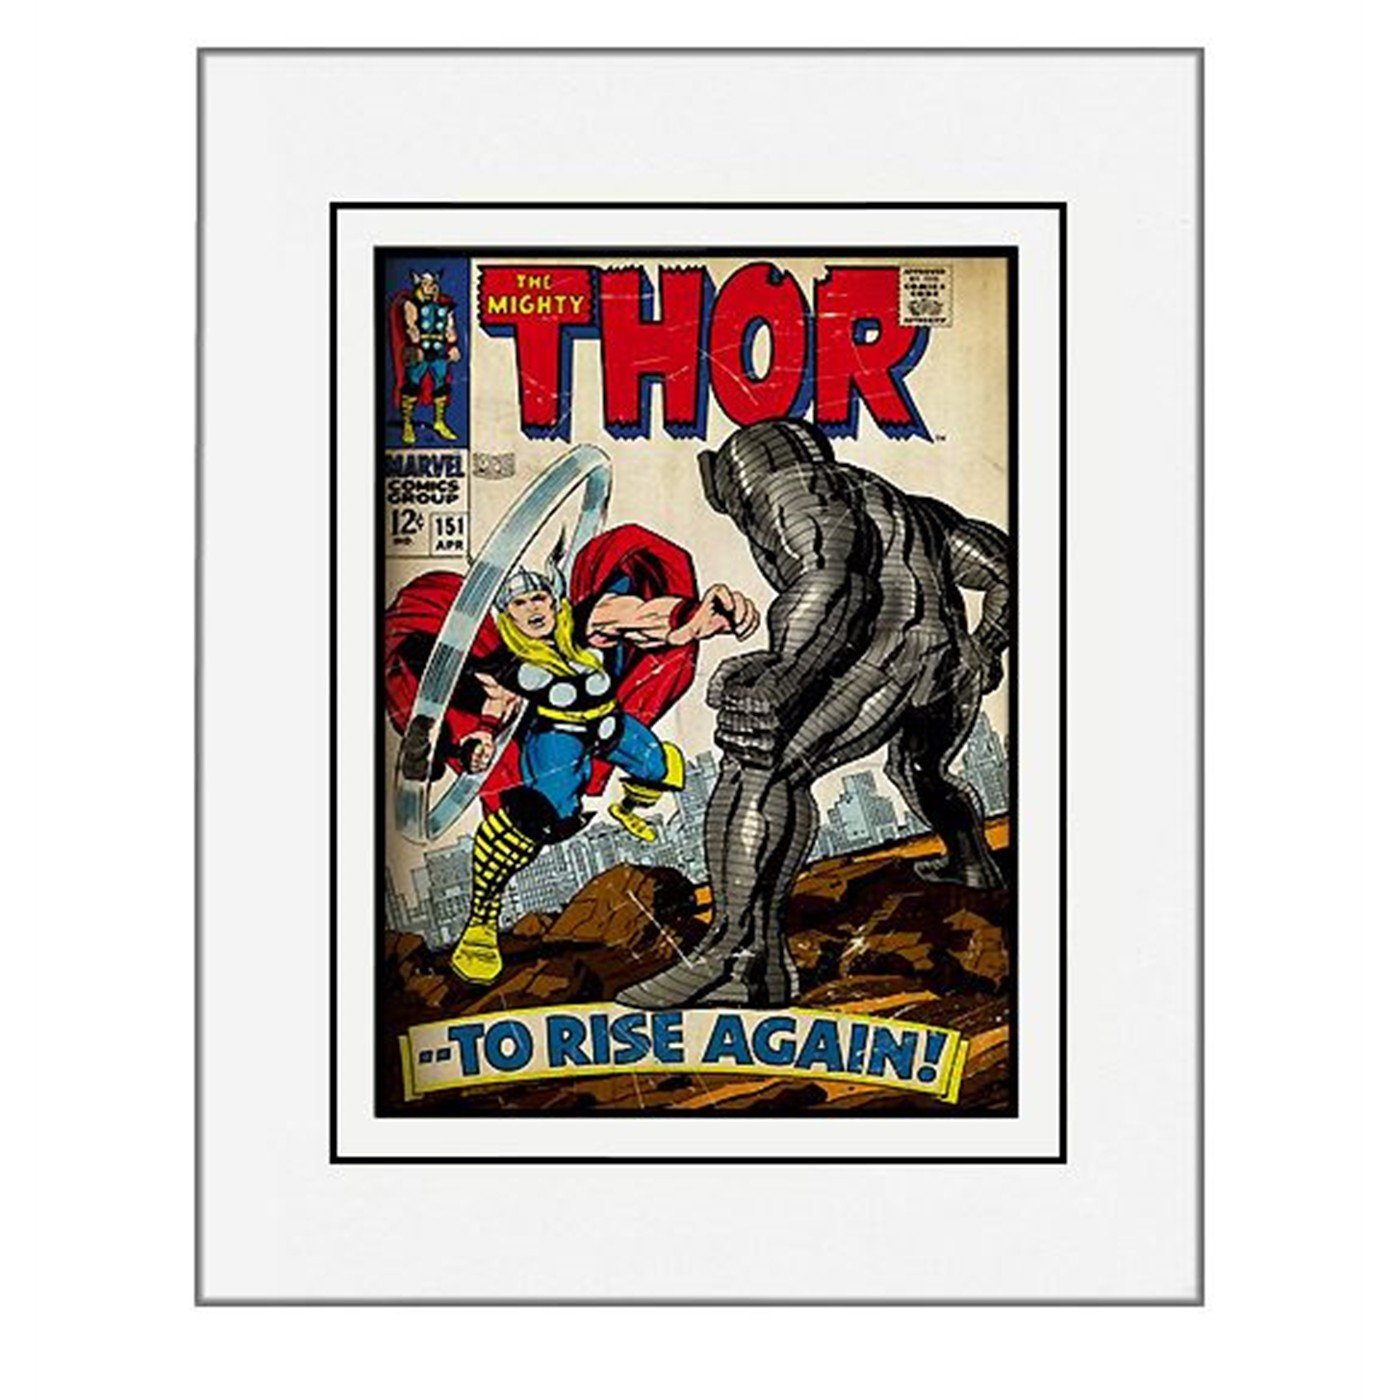 Thor Issue #151 Cover 11x14 Matted Print